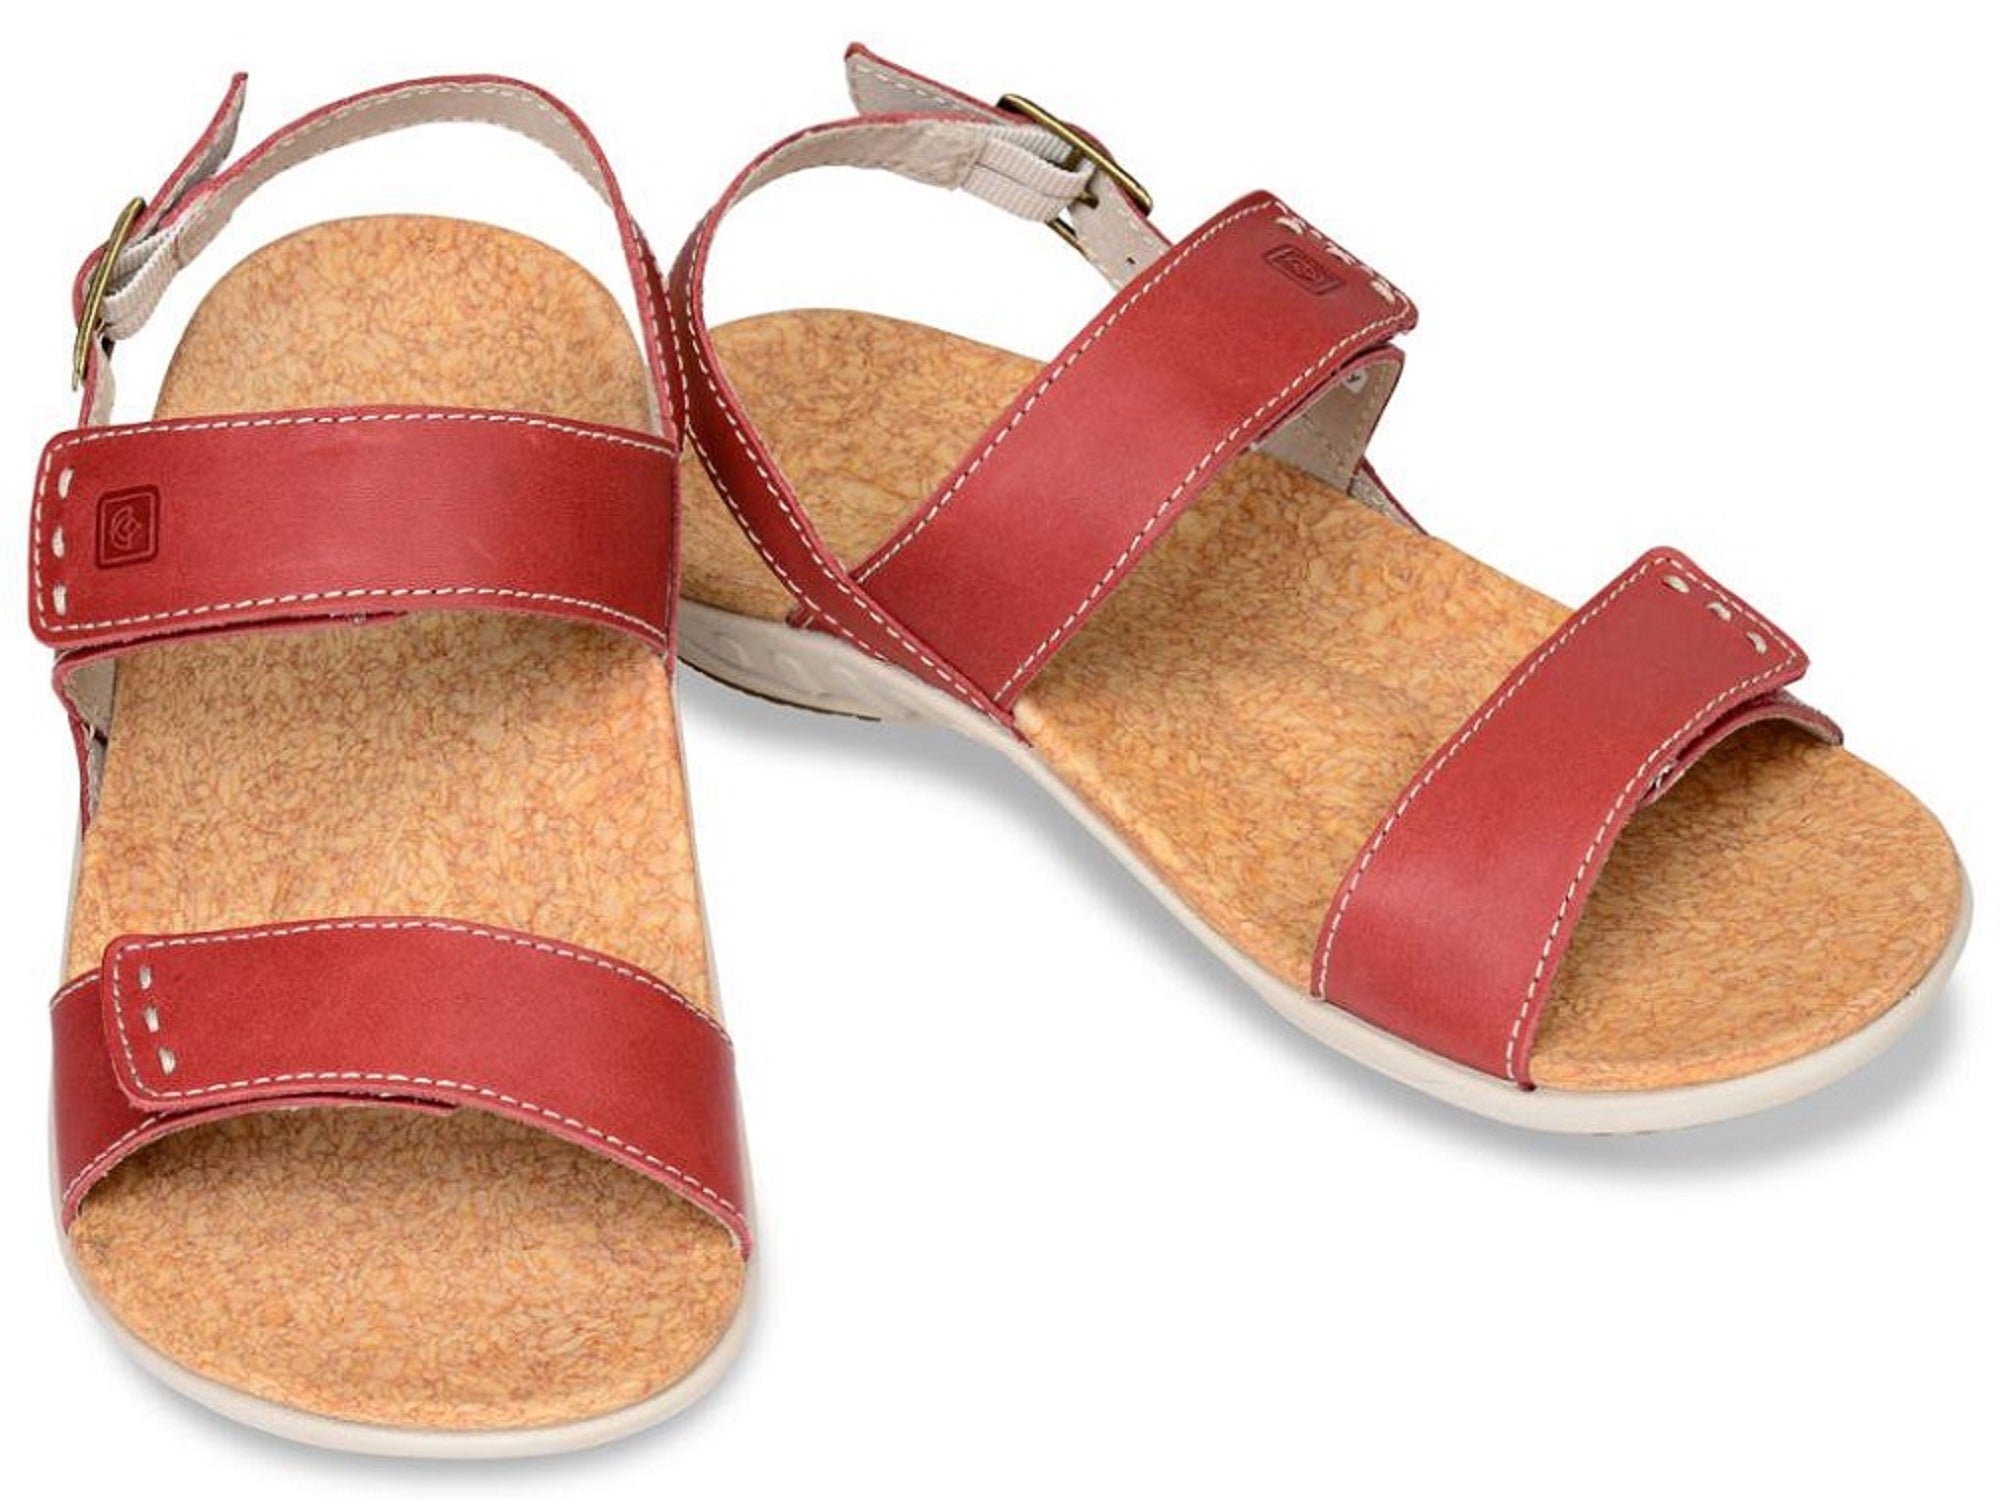 Spenco Alex Women's Strap Orthotic Sandals - Robin Red - Size 11